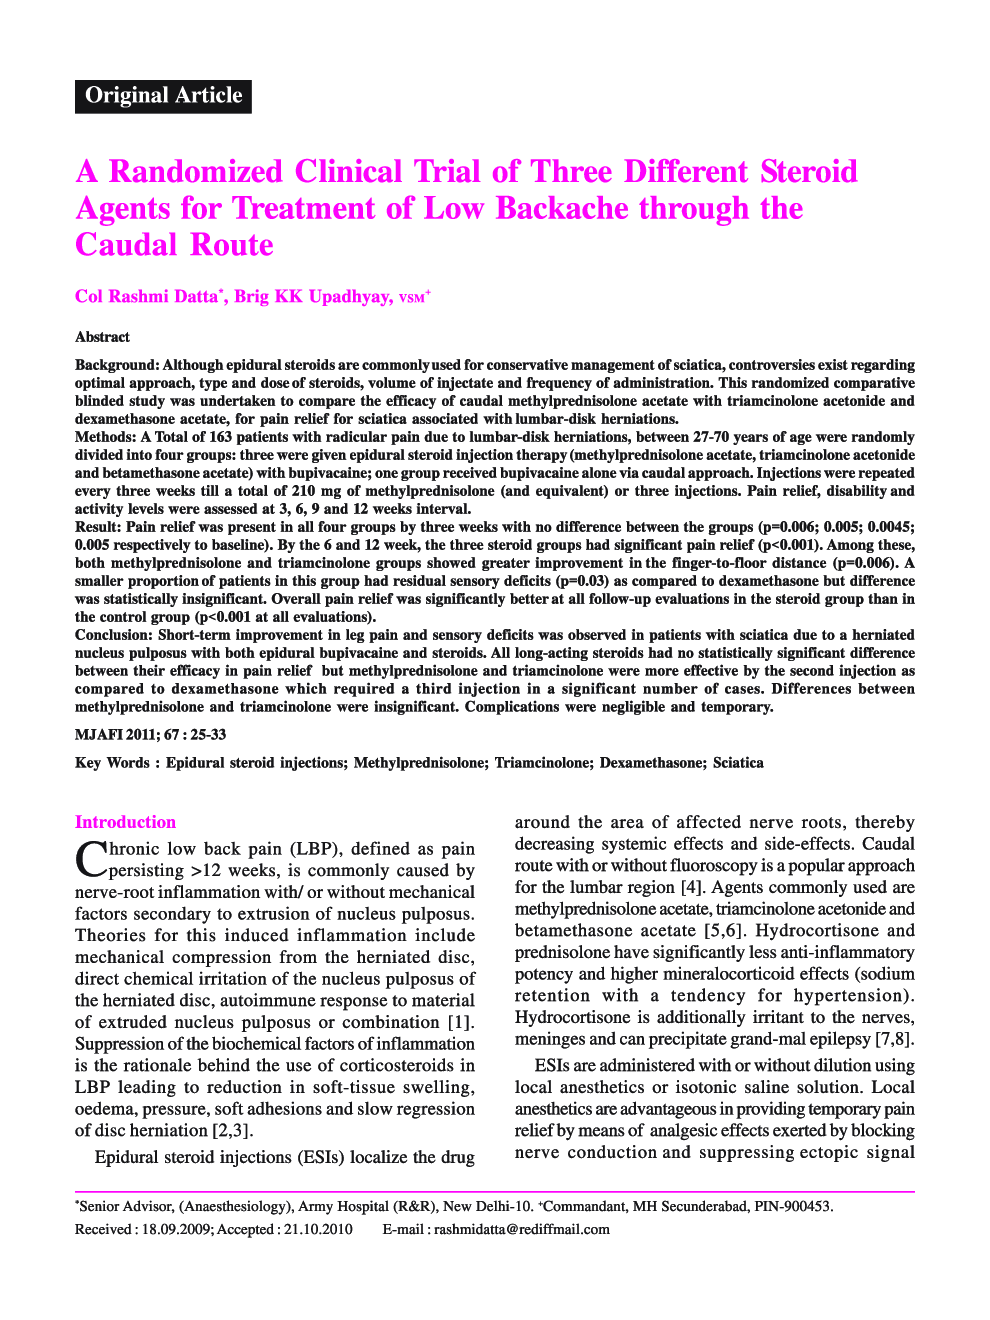 A Randomized Clinical Trial of Three Different Steroid Agents for Treatment of Low Backache through the Caudal Route